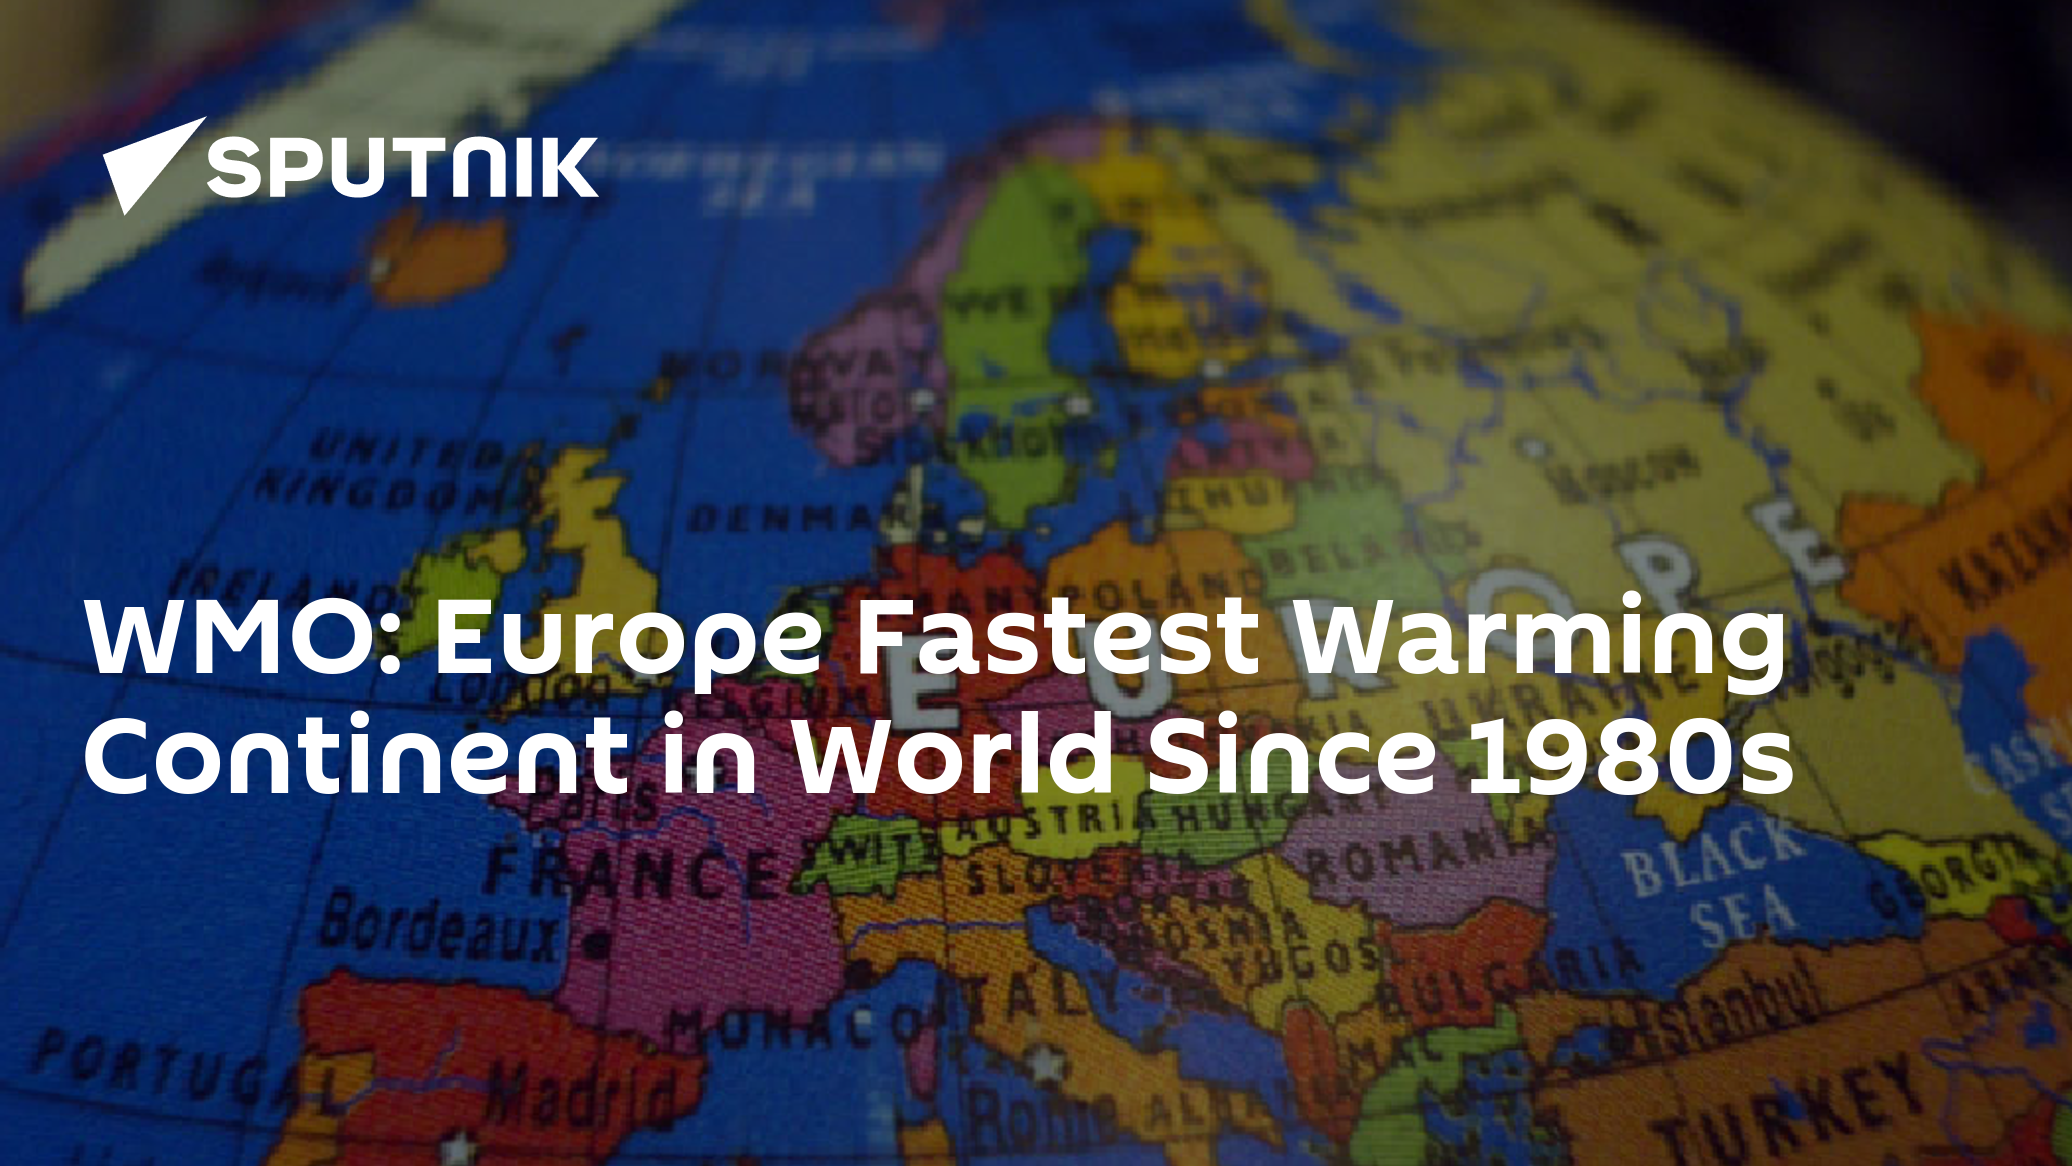 WMO: Europe Fastest Warming Continent in World Since 1980s